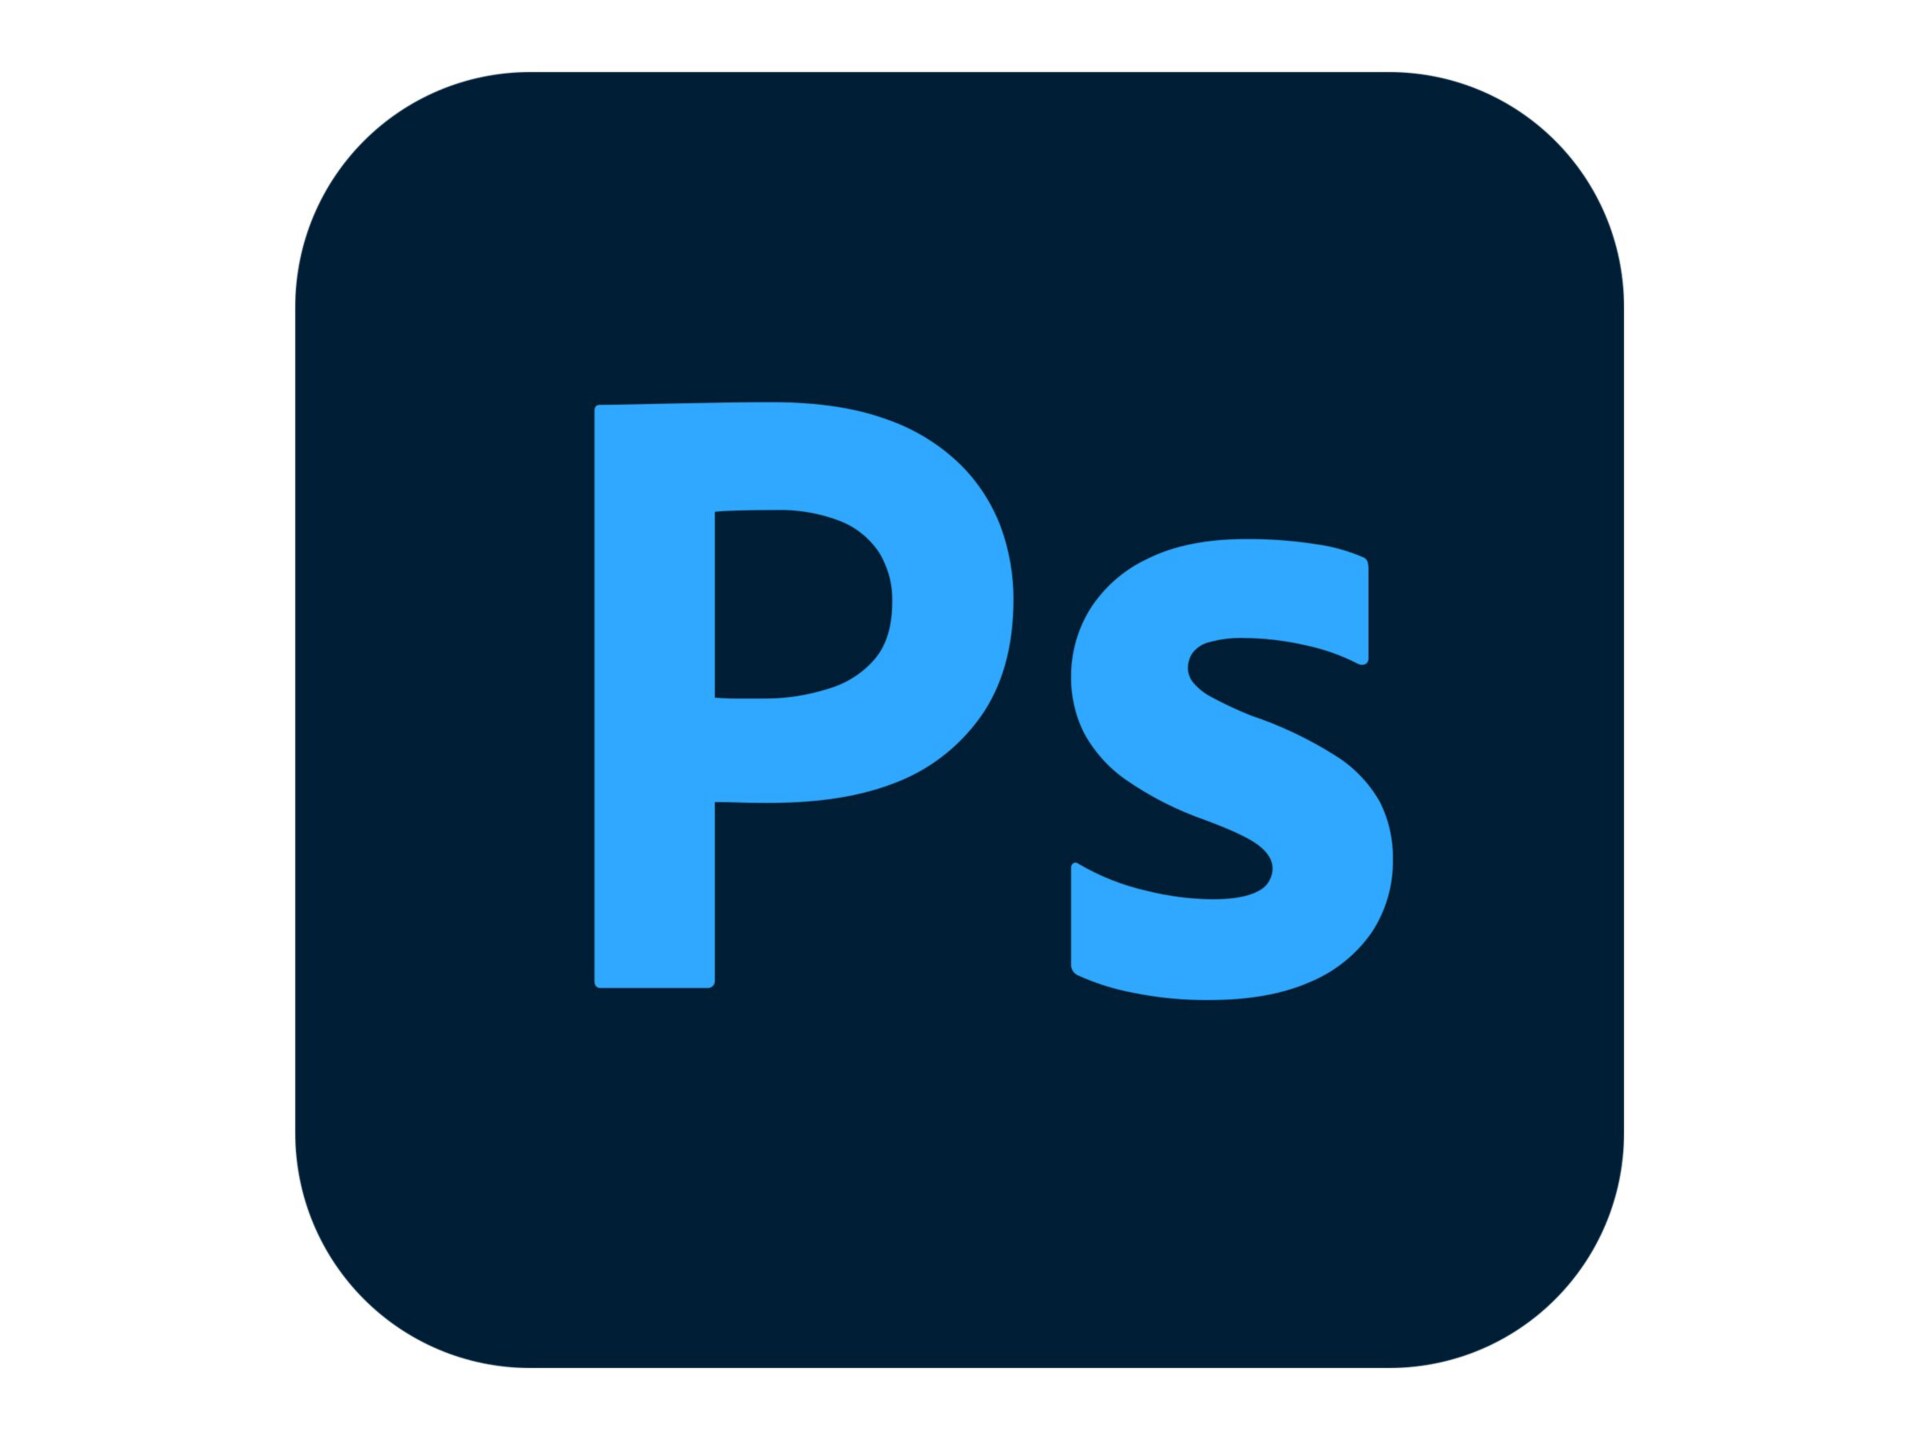 Adobe Photoshop CC for teams - Subscription New (46 months) - 1 named user